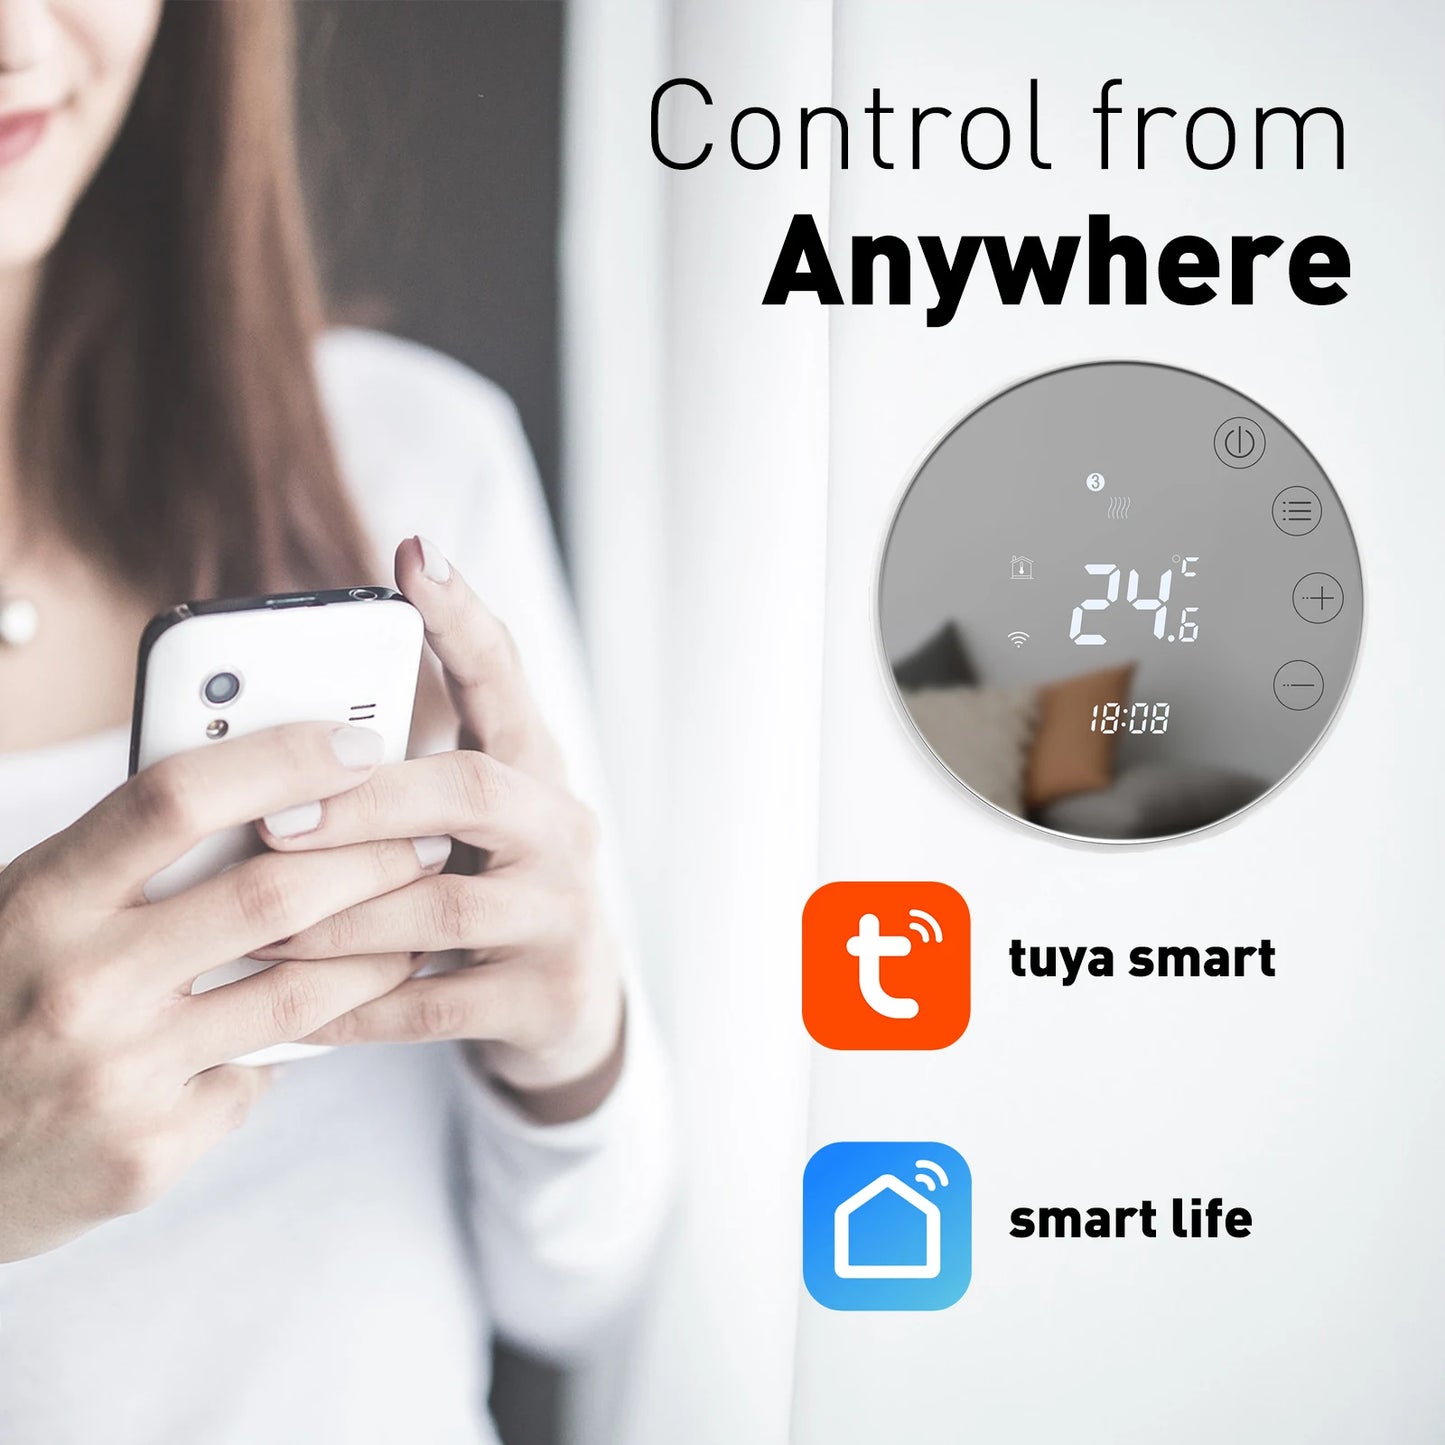 Smart WiFi Thermostat: LCD Touch Screen, Energy Saving Thermostat, Gas Boiler Heating, Compatible with Alexa